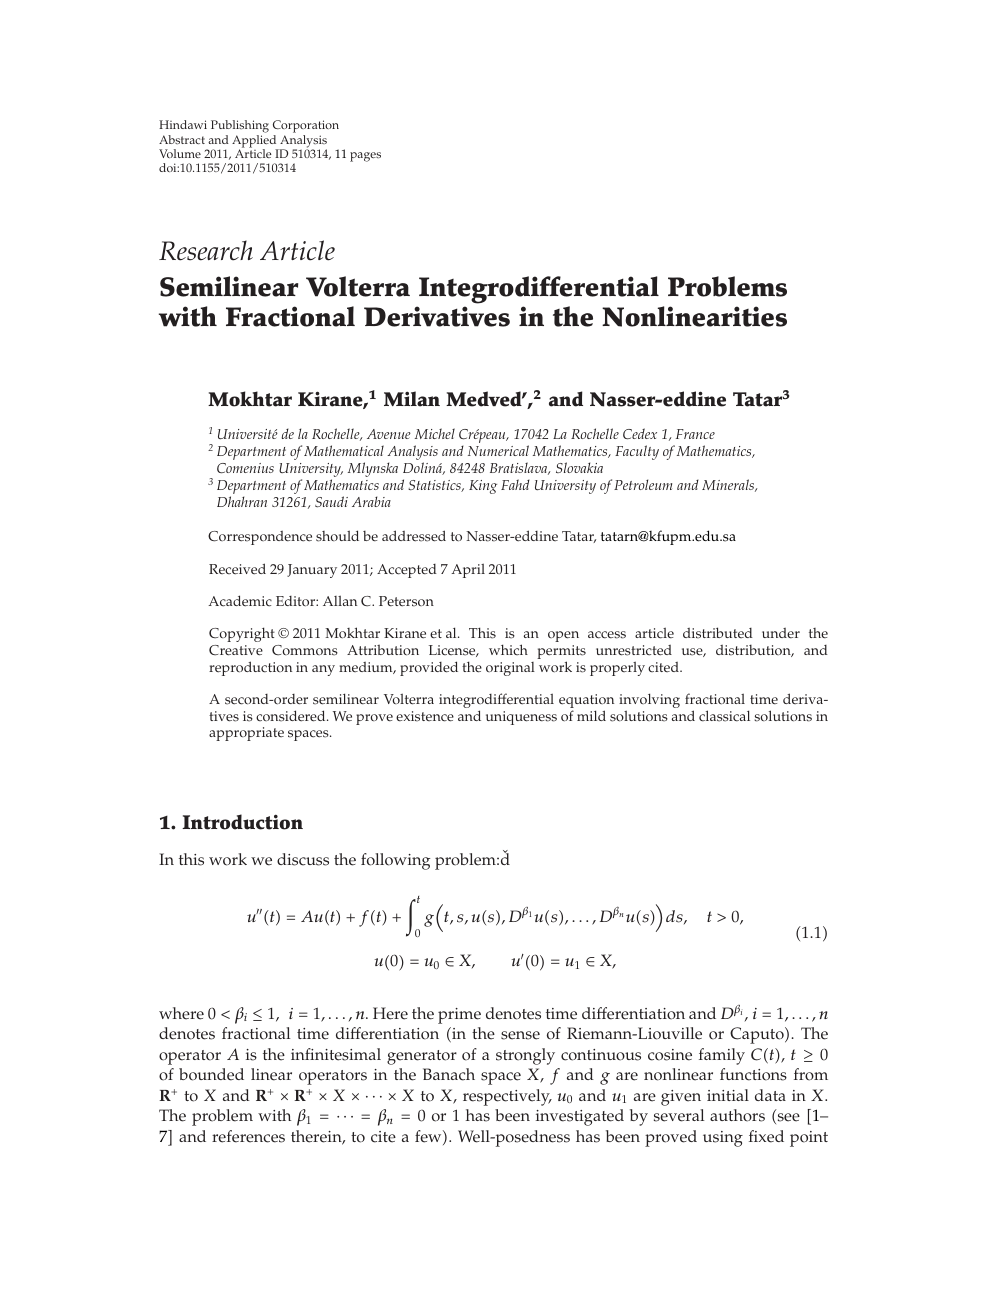 Semilinear Volterra Integrodifferential Problems With Fractional Derivatives In The Nonlinearities Topic Of Research Paper In Mathematics Download Scholarly Article Pdf And Read For Free On Cyberleninka Open Science Hub